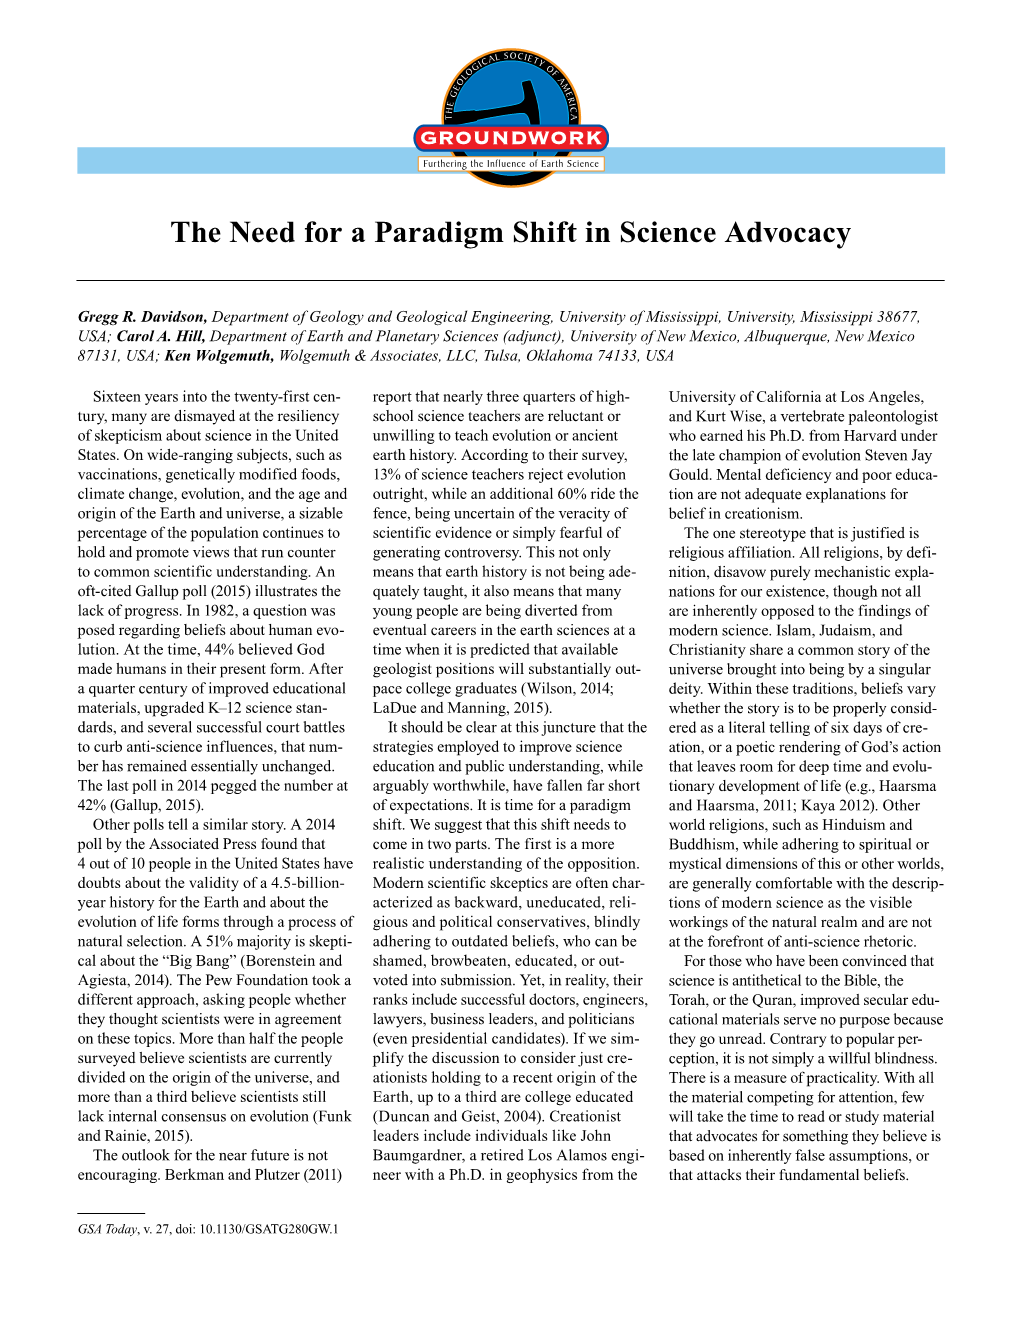 The Need for a Paradigm Shift in Science Advocacy